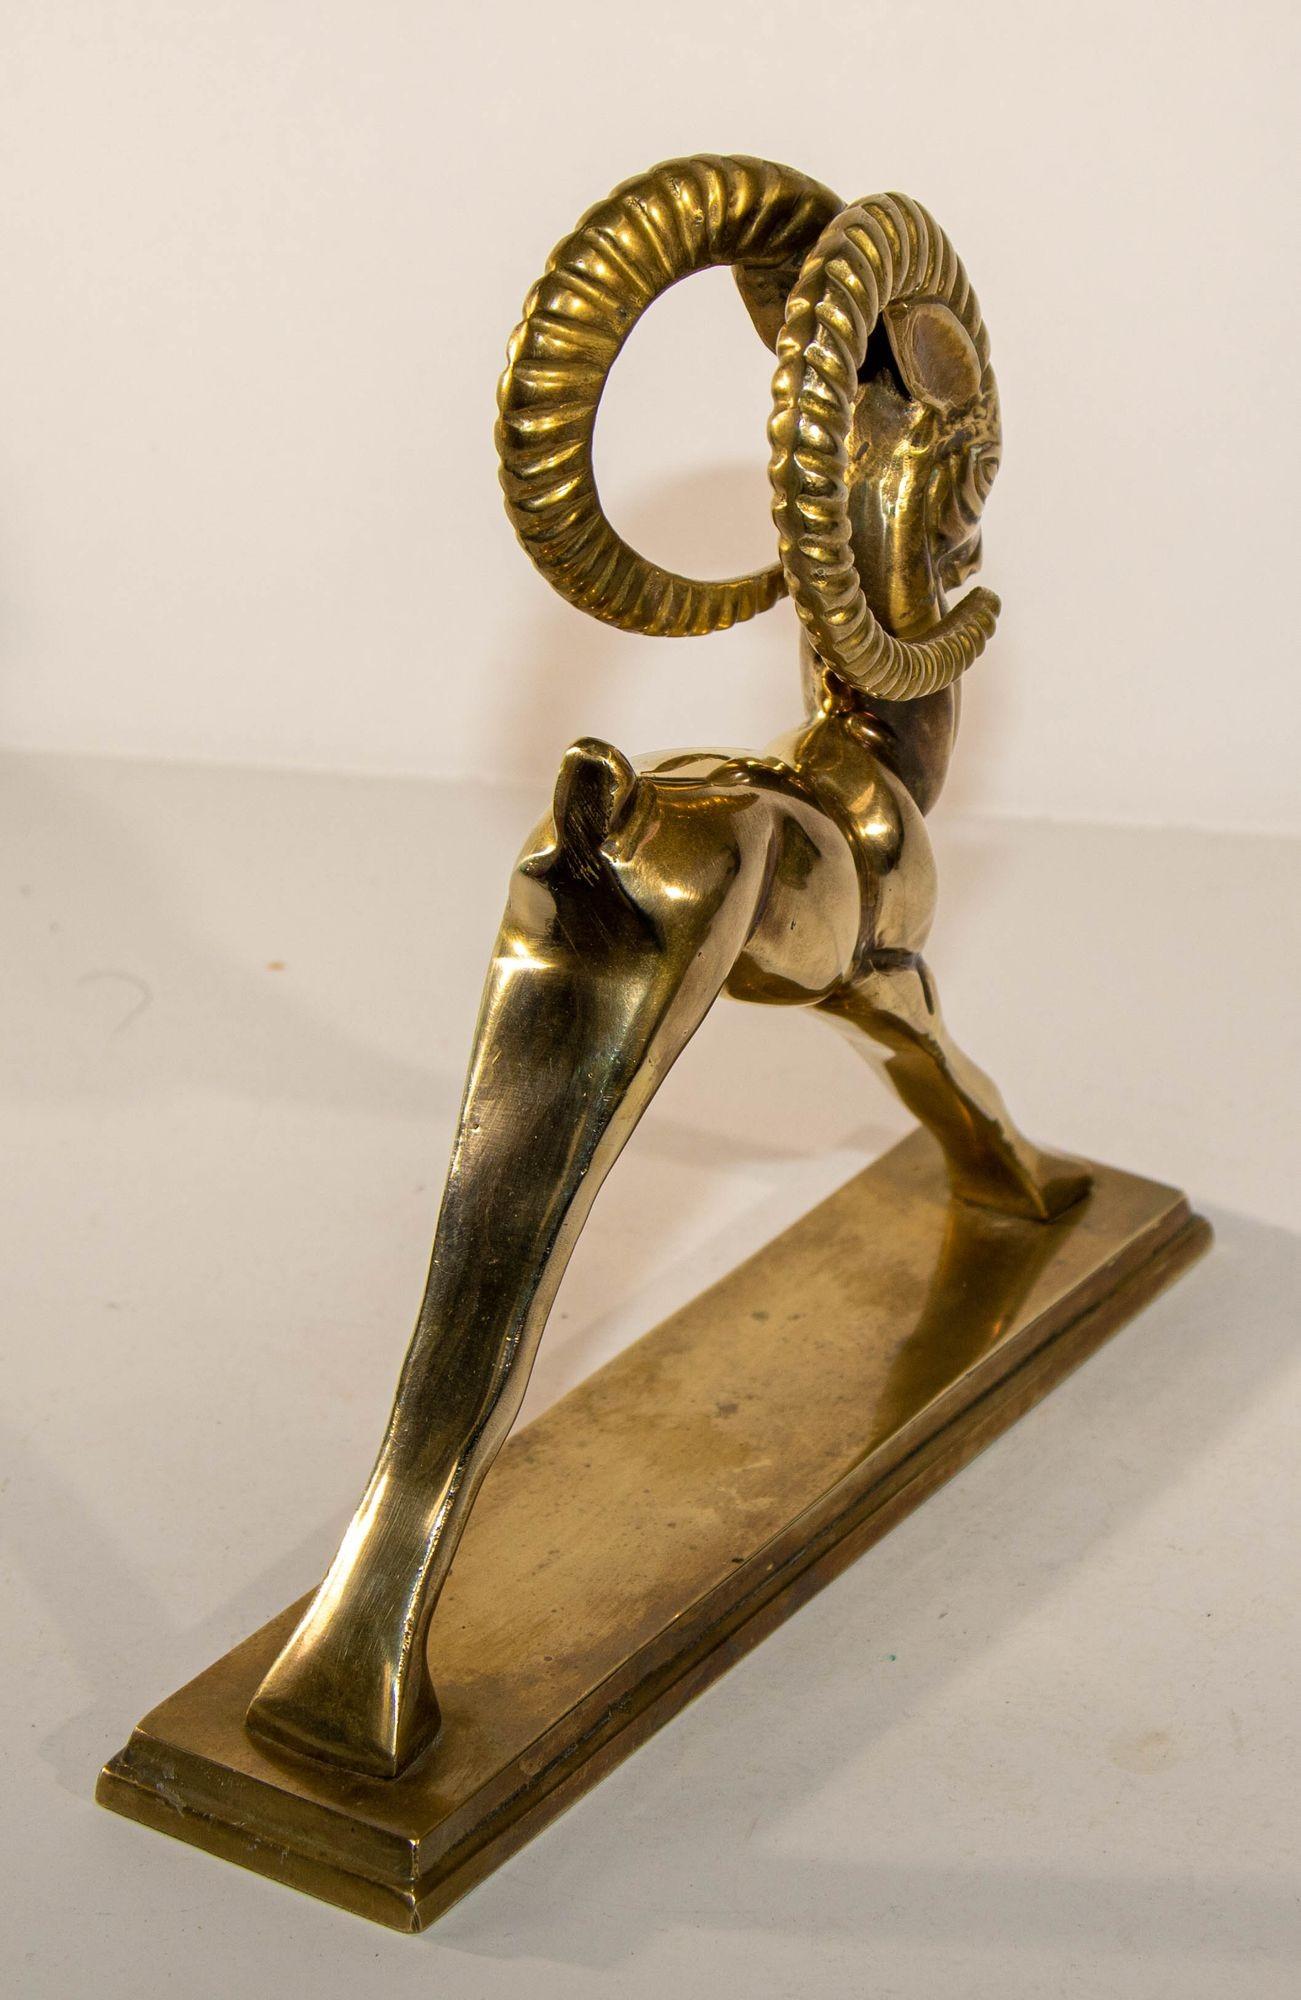 American Vintage French Art Deco Style Sculpture of Brass Ibex Antelope For Sale